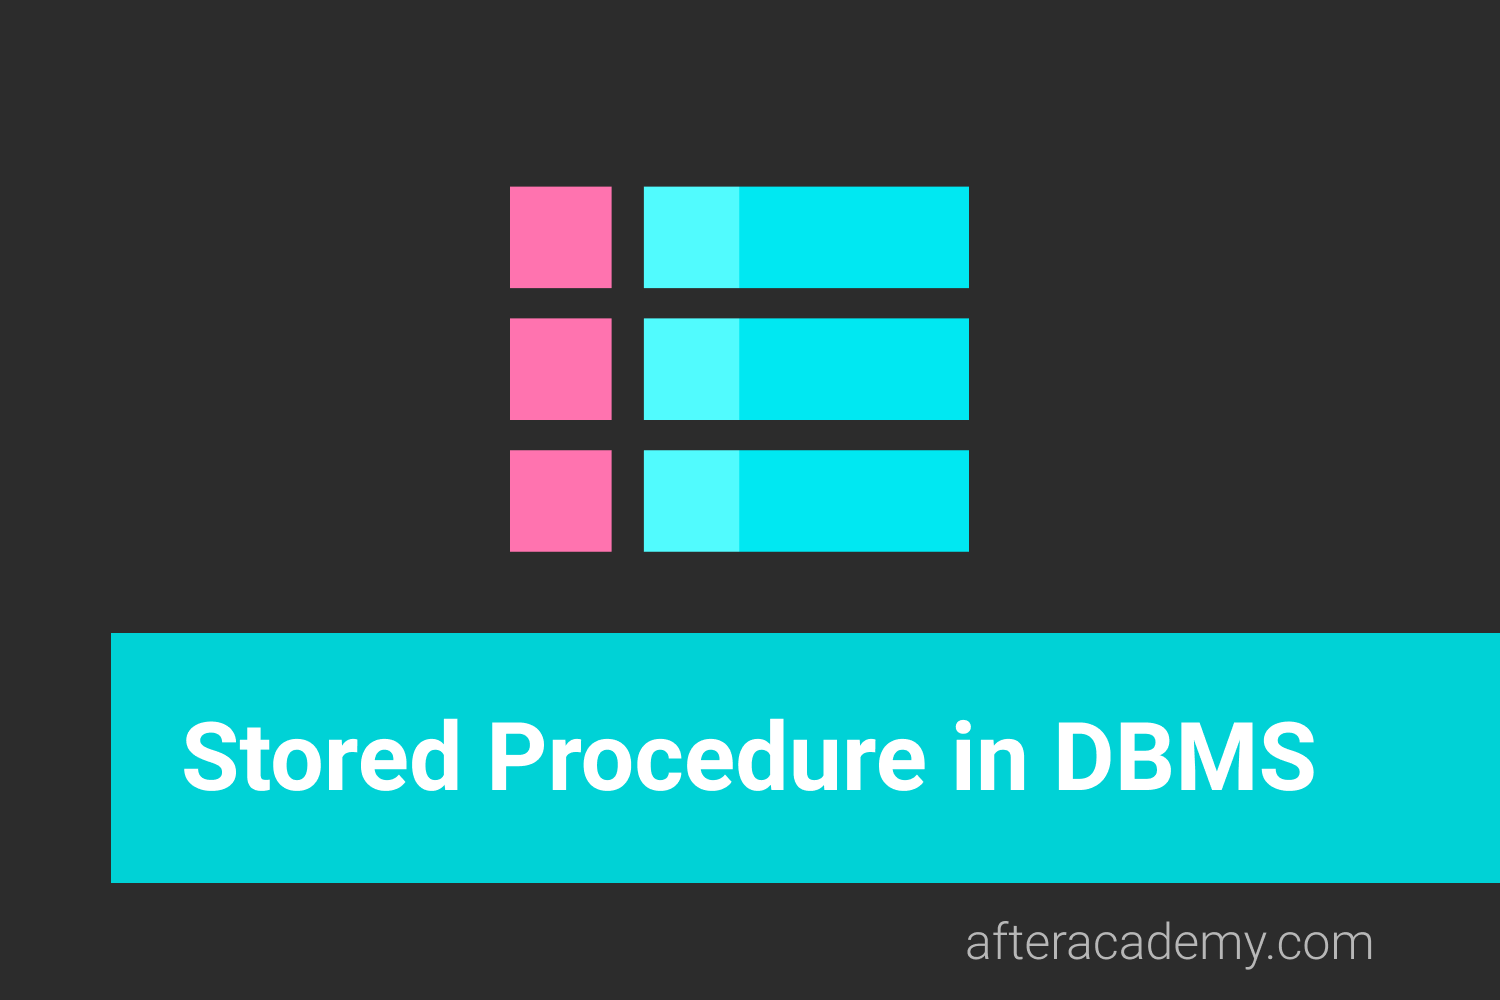 What is a Stored Procedure in DBMS?